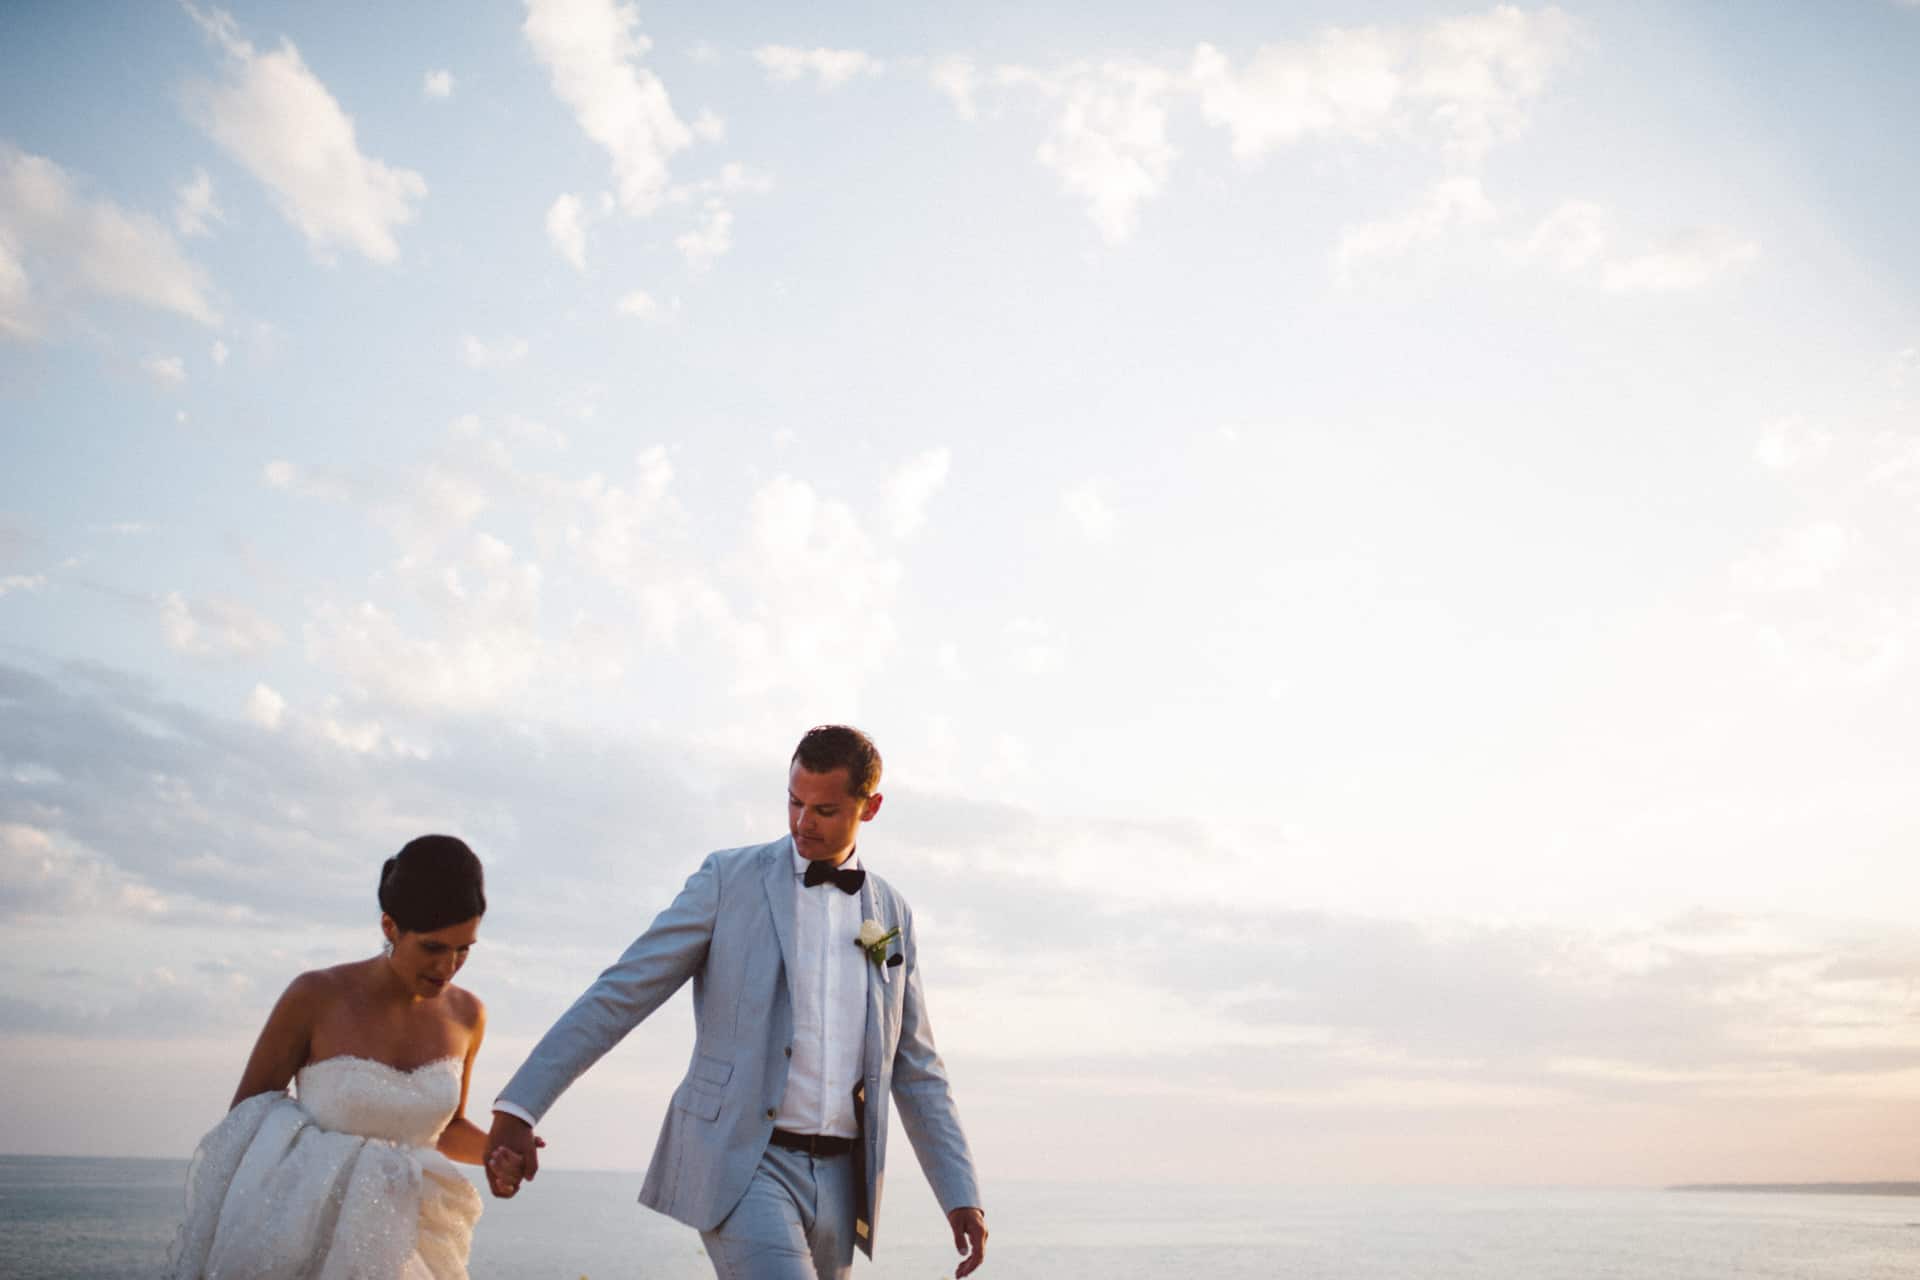 Best wedding images of the year (089 of 316)